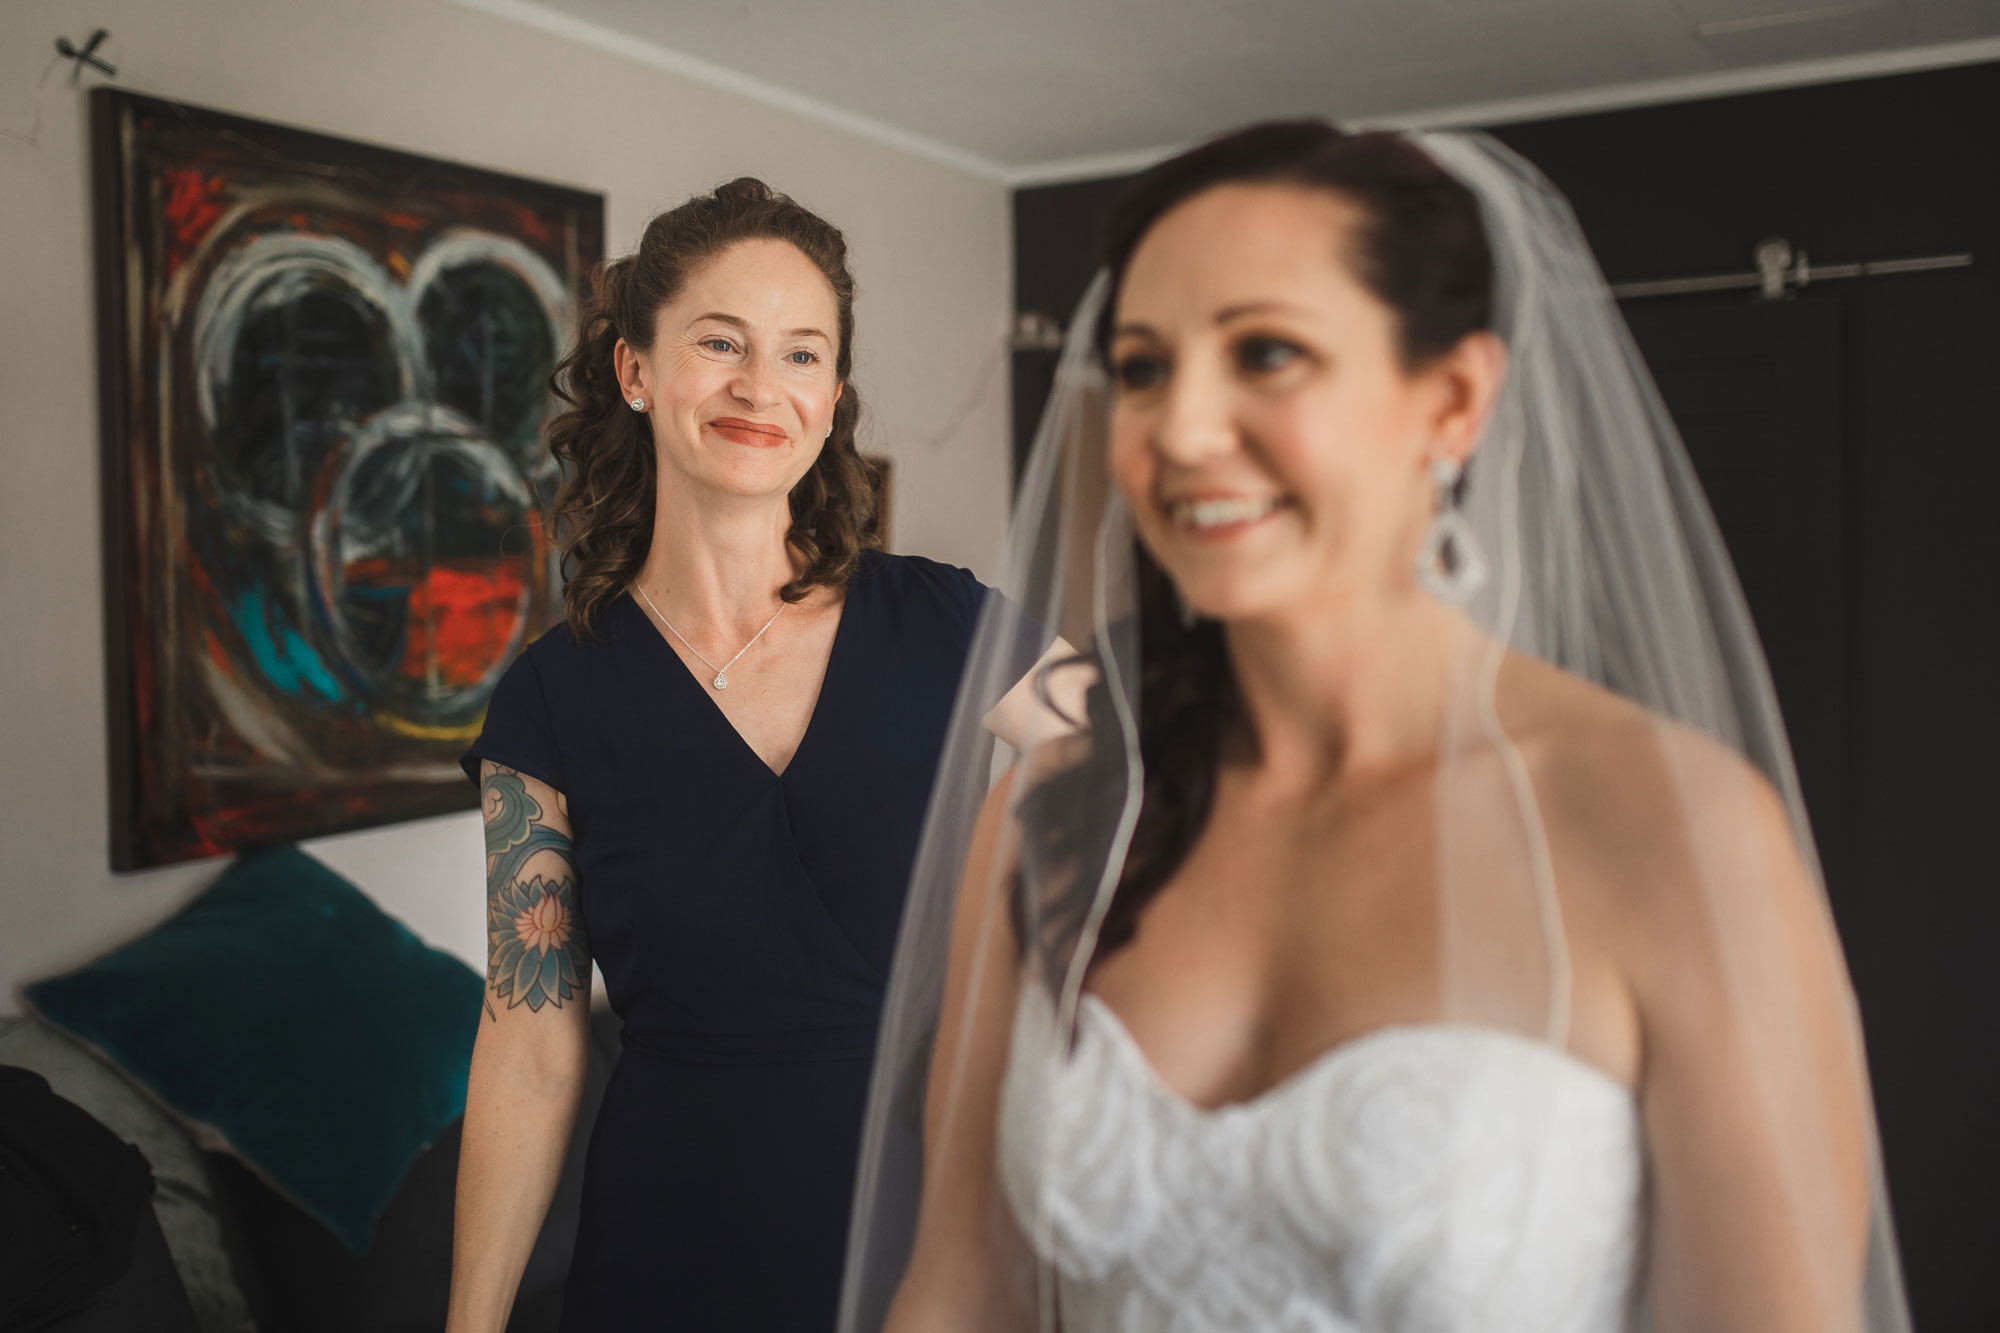 bride and her sister